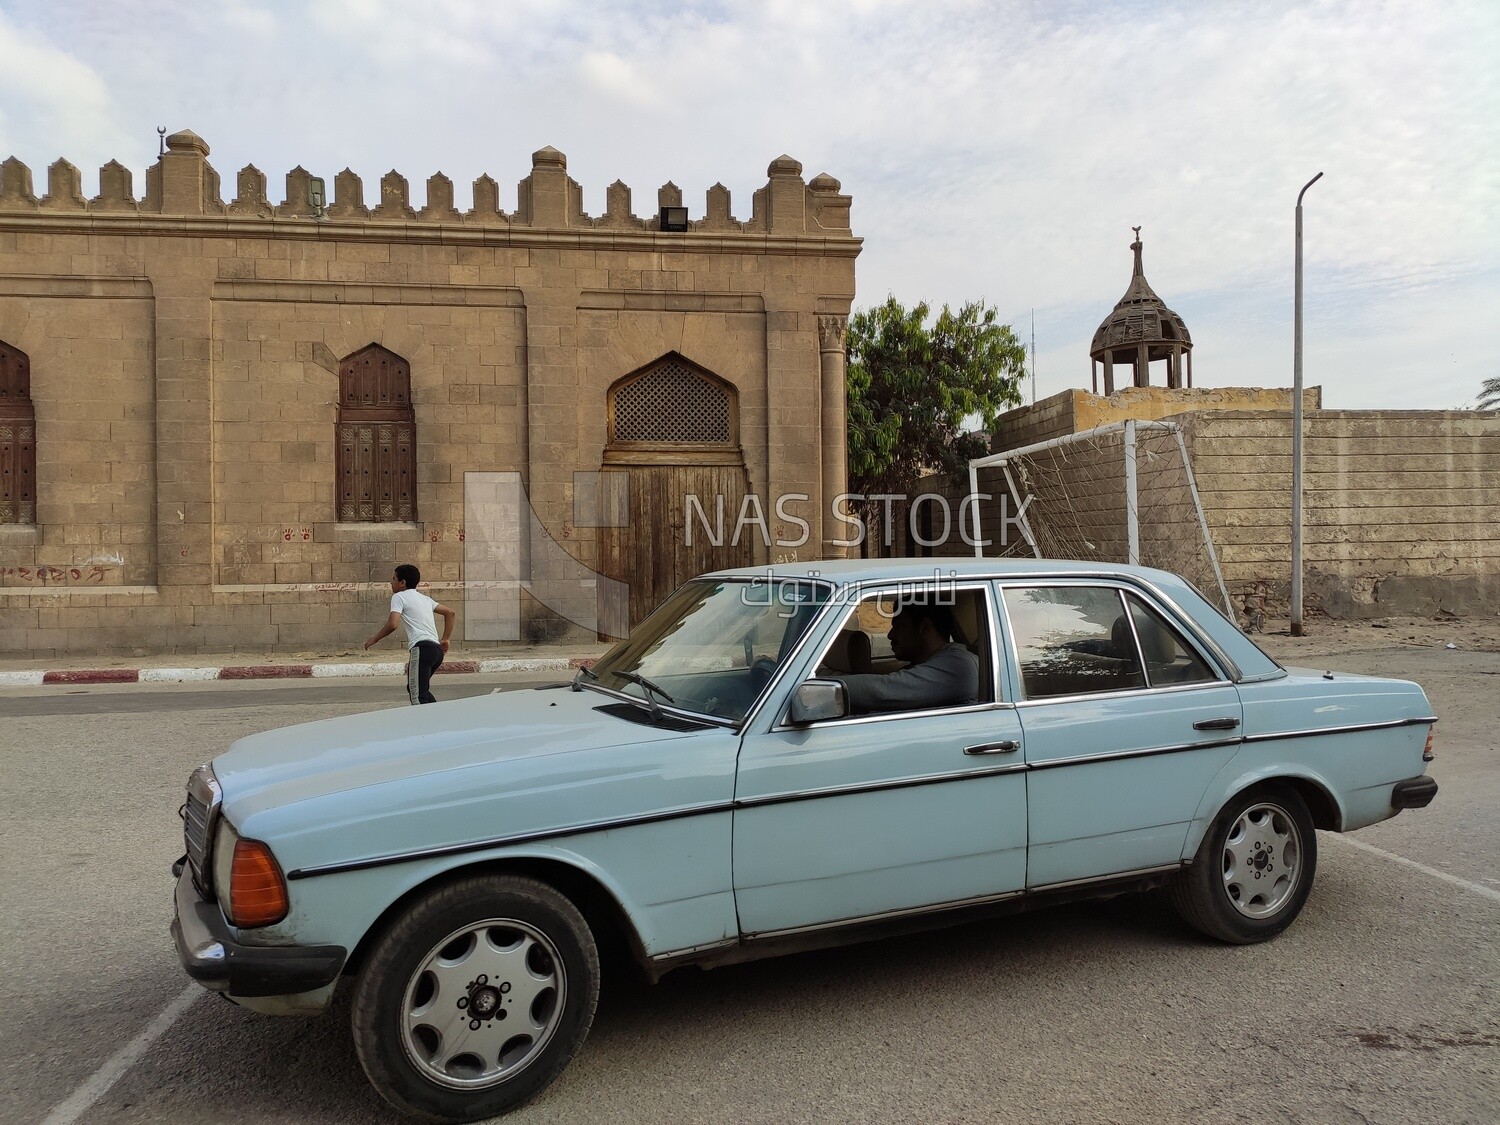 Old-fashioned car from the cars of the last century driven by a man in the streets of Cairo